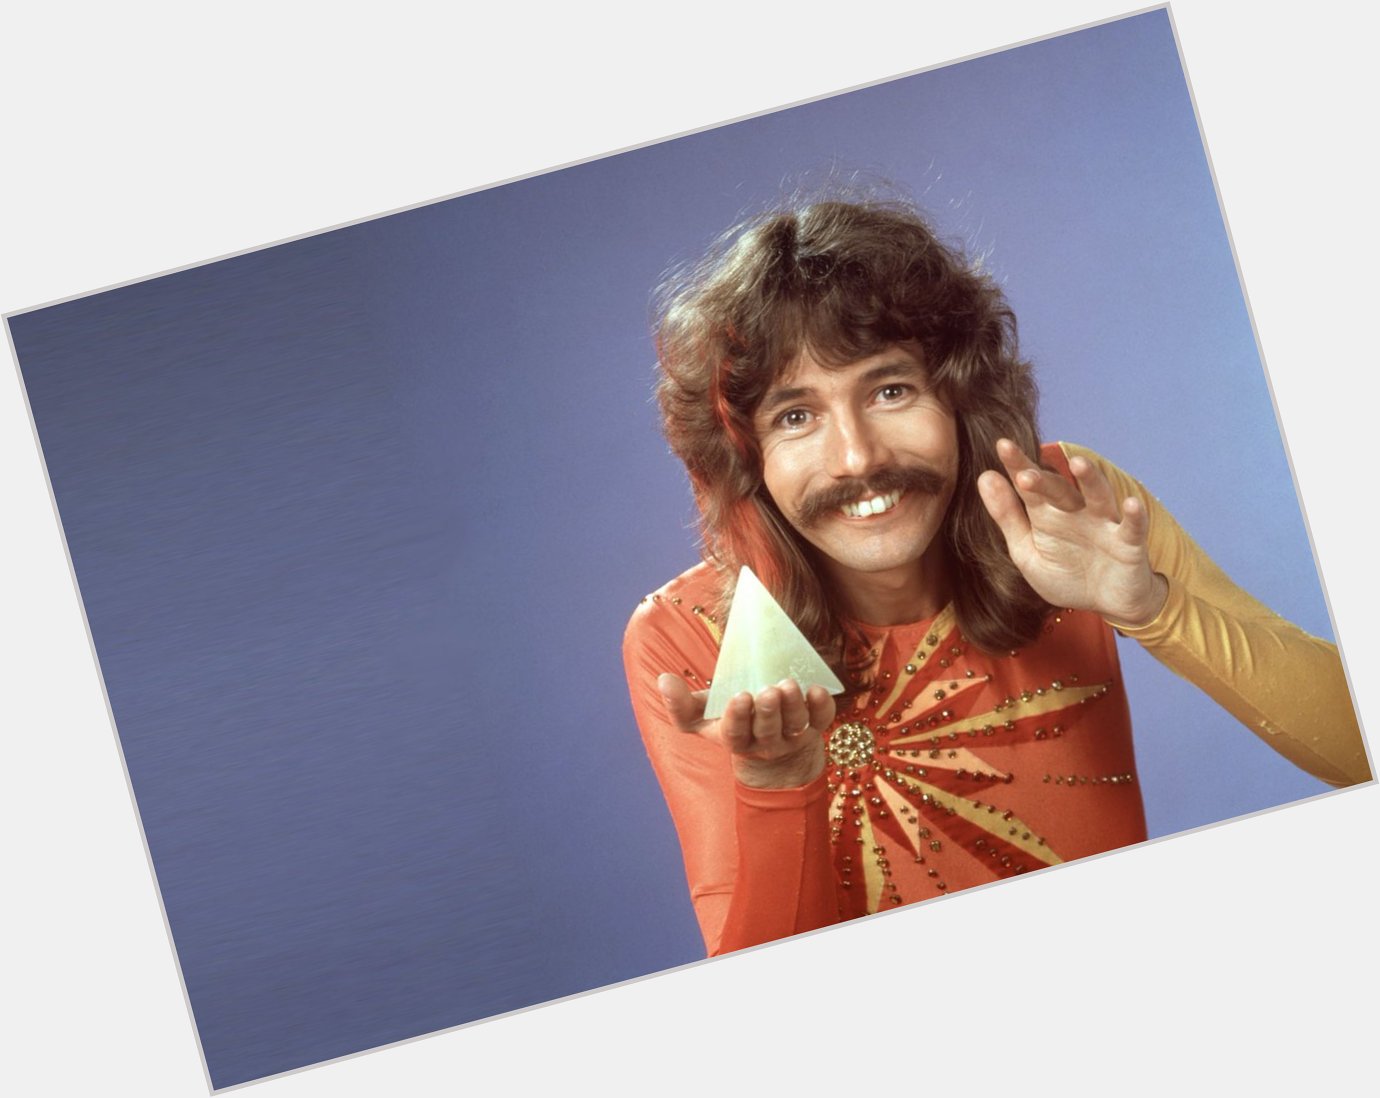 Born this day in 1947. Happy 70th birthday to the late, great magician Doug Henning. 